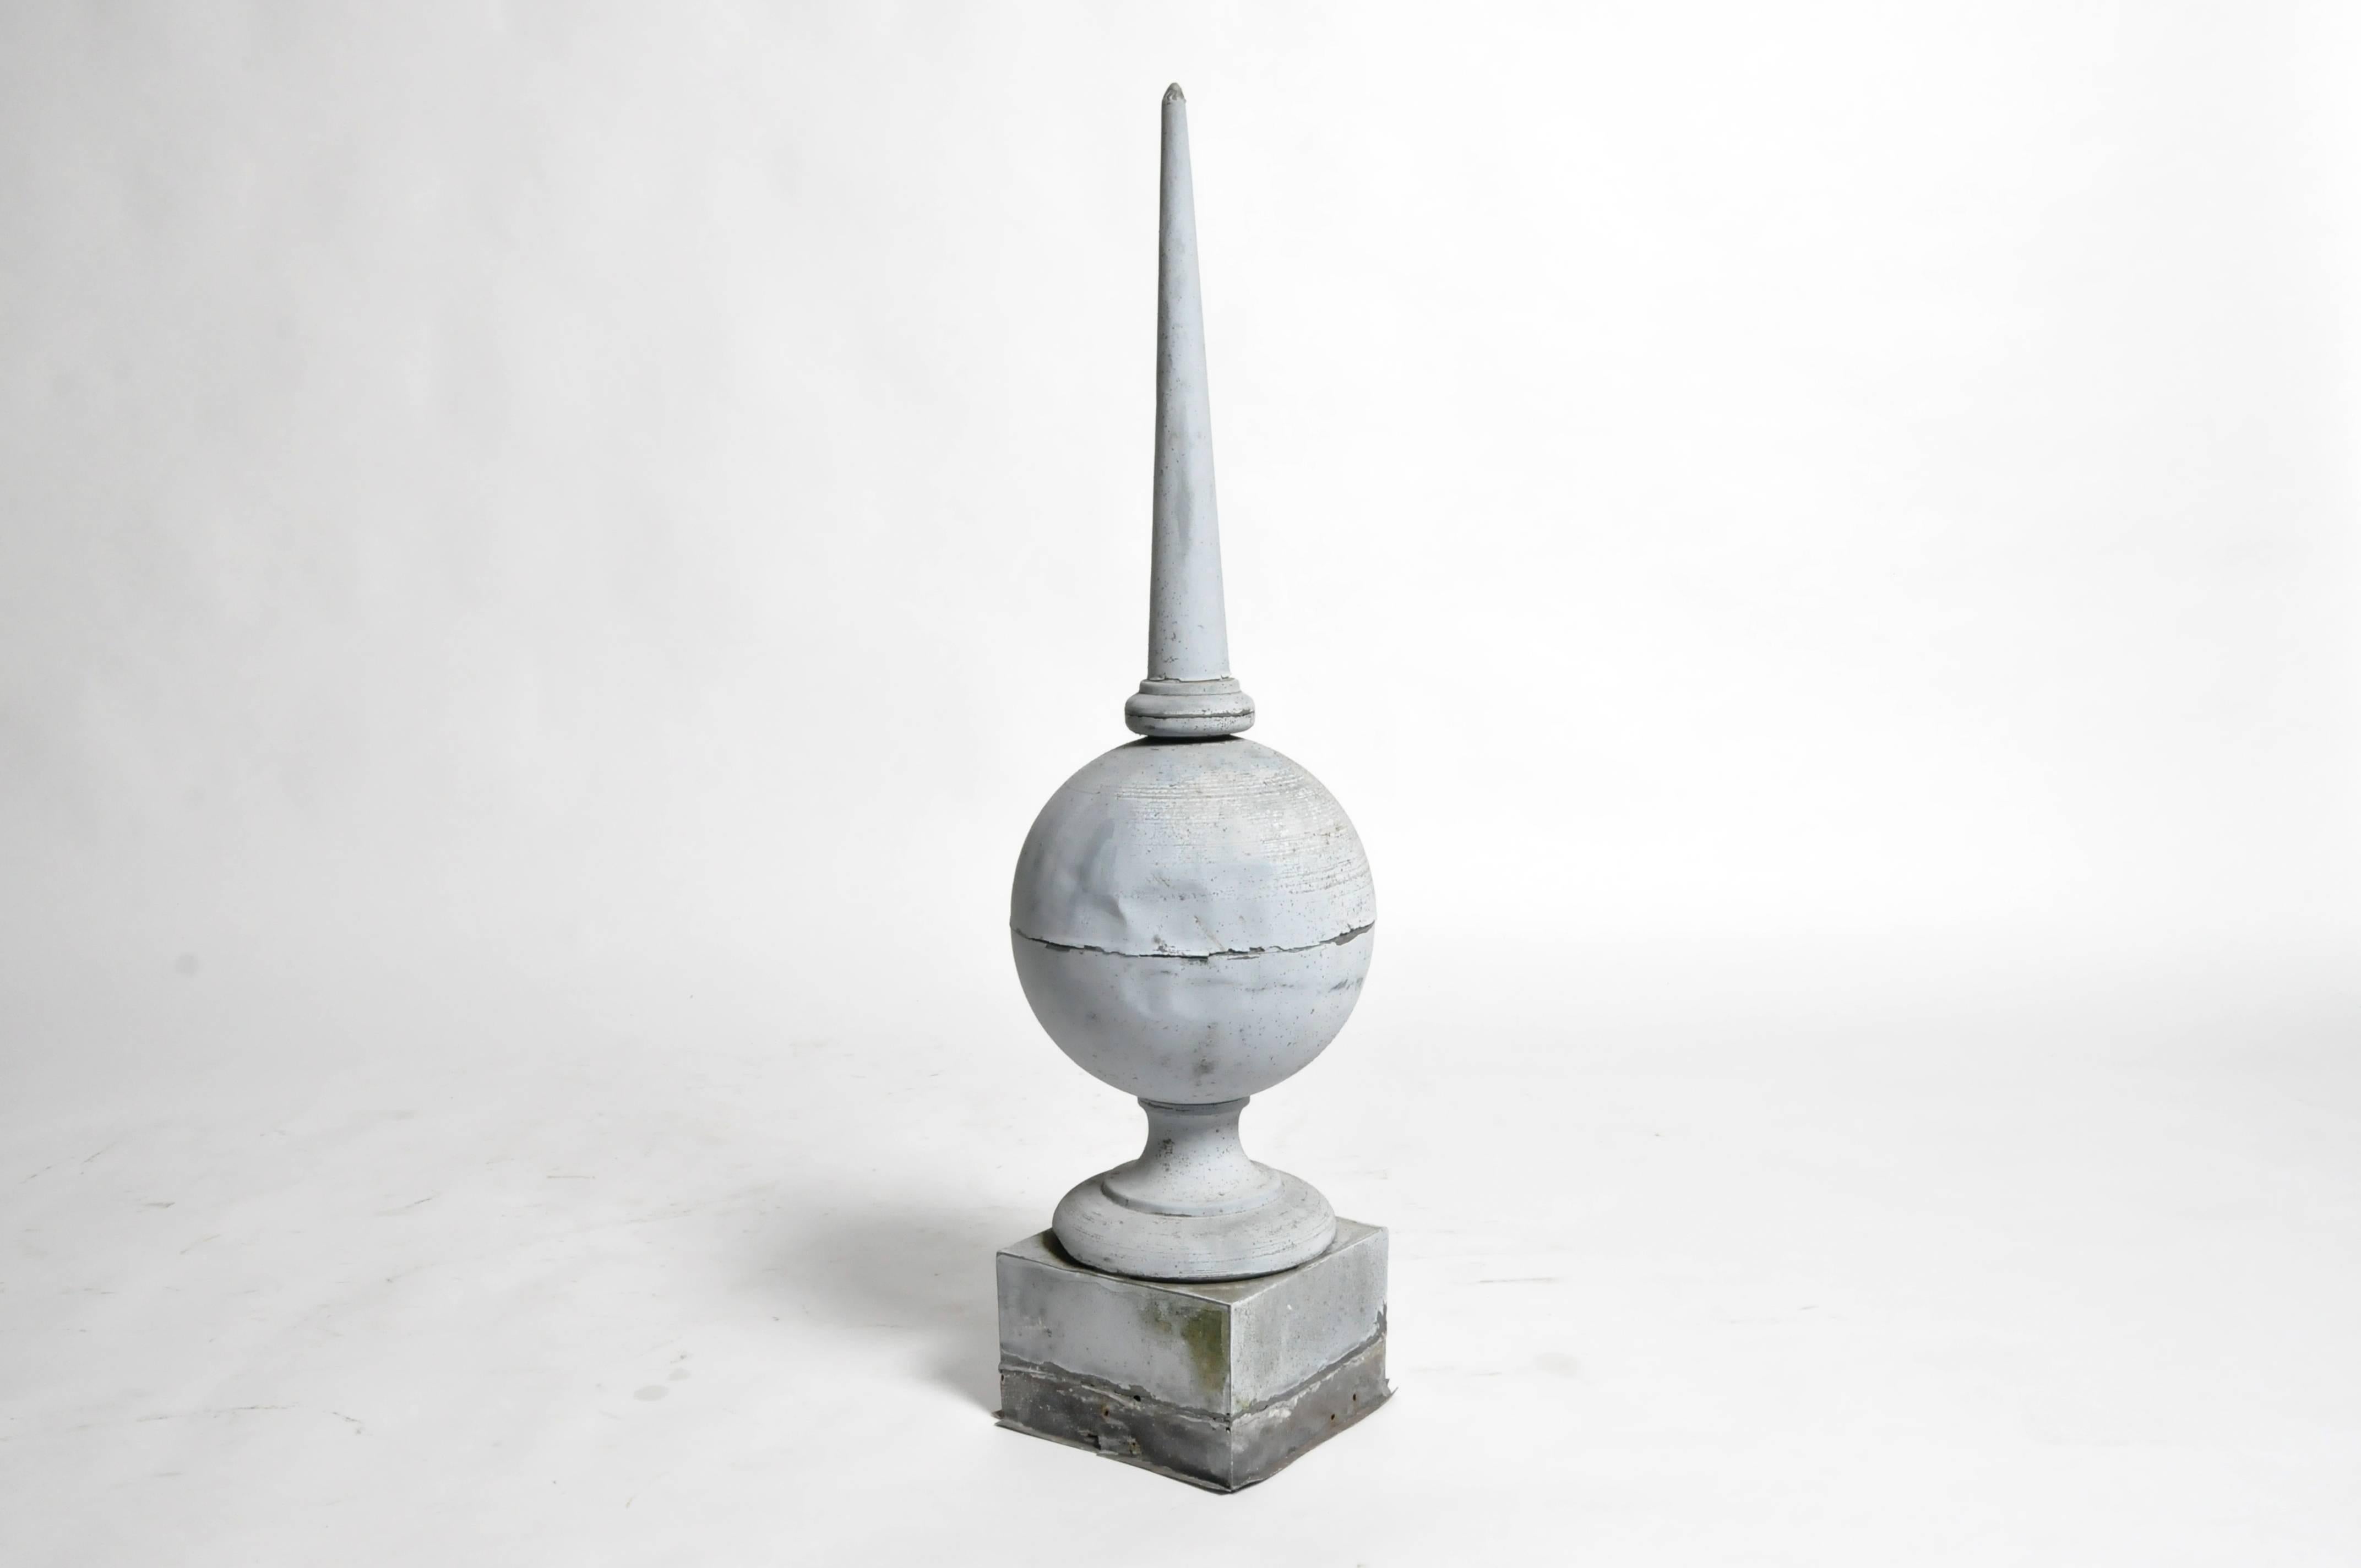 This pair of finials are from Paris, France and made from zinc, c. 1900. They were most likely part of a vintage French building and are great for accessorizing any room. 